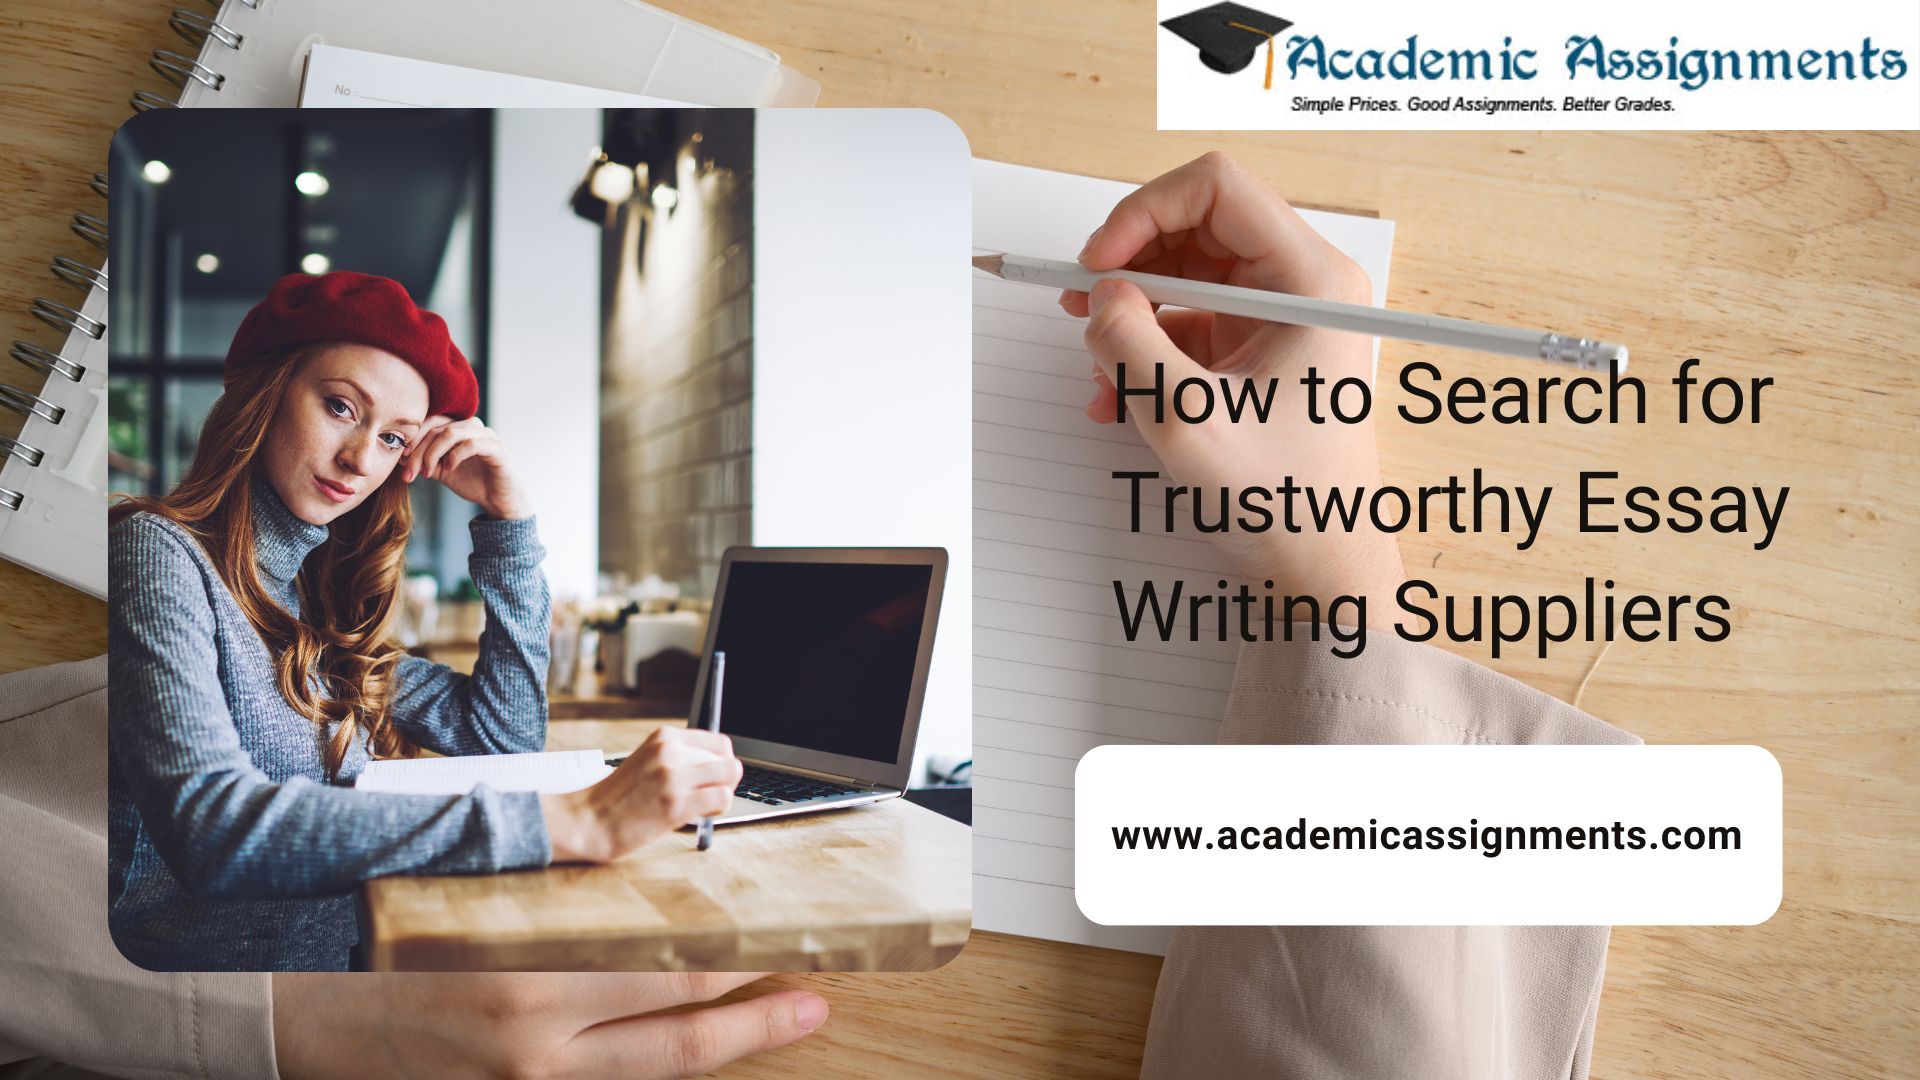 How to Search for Trustworthy Essay Writing Suppliers